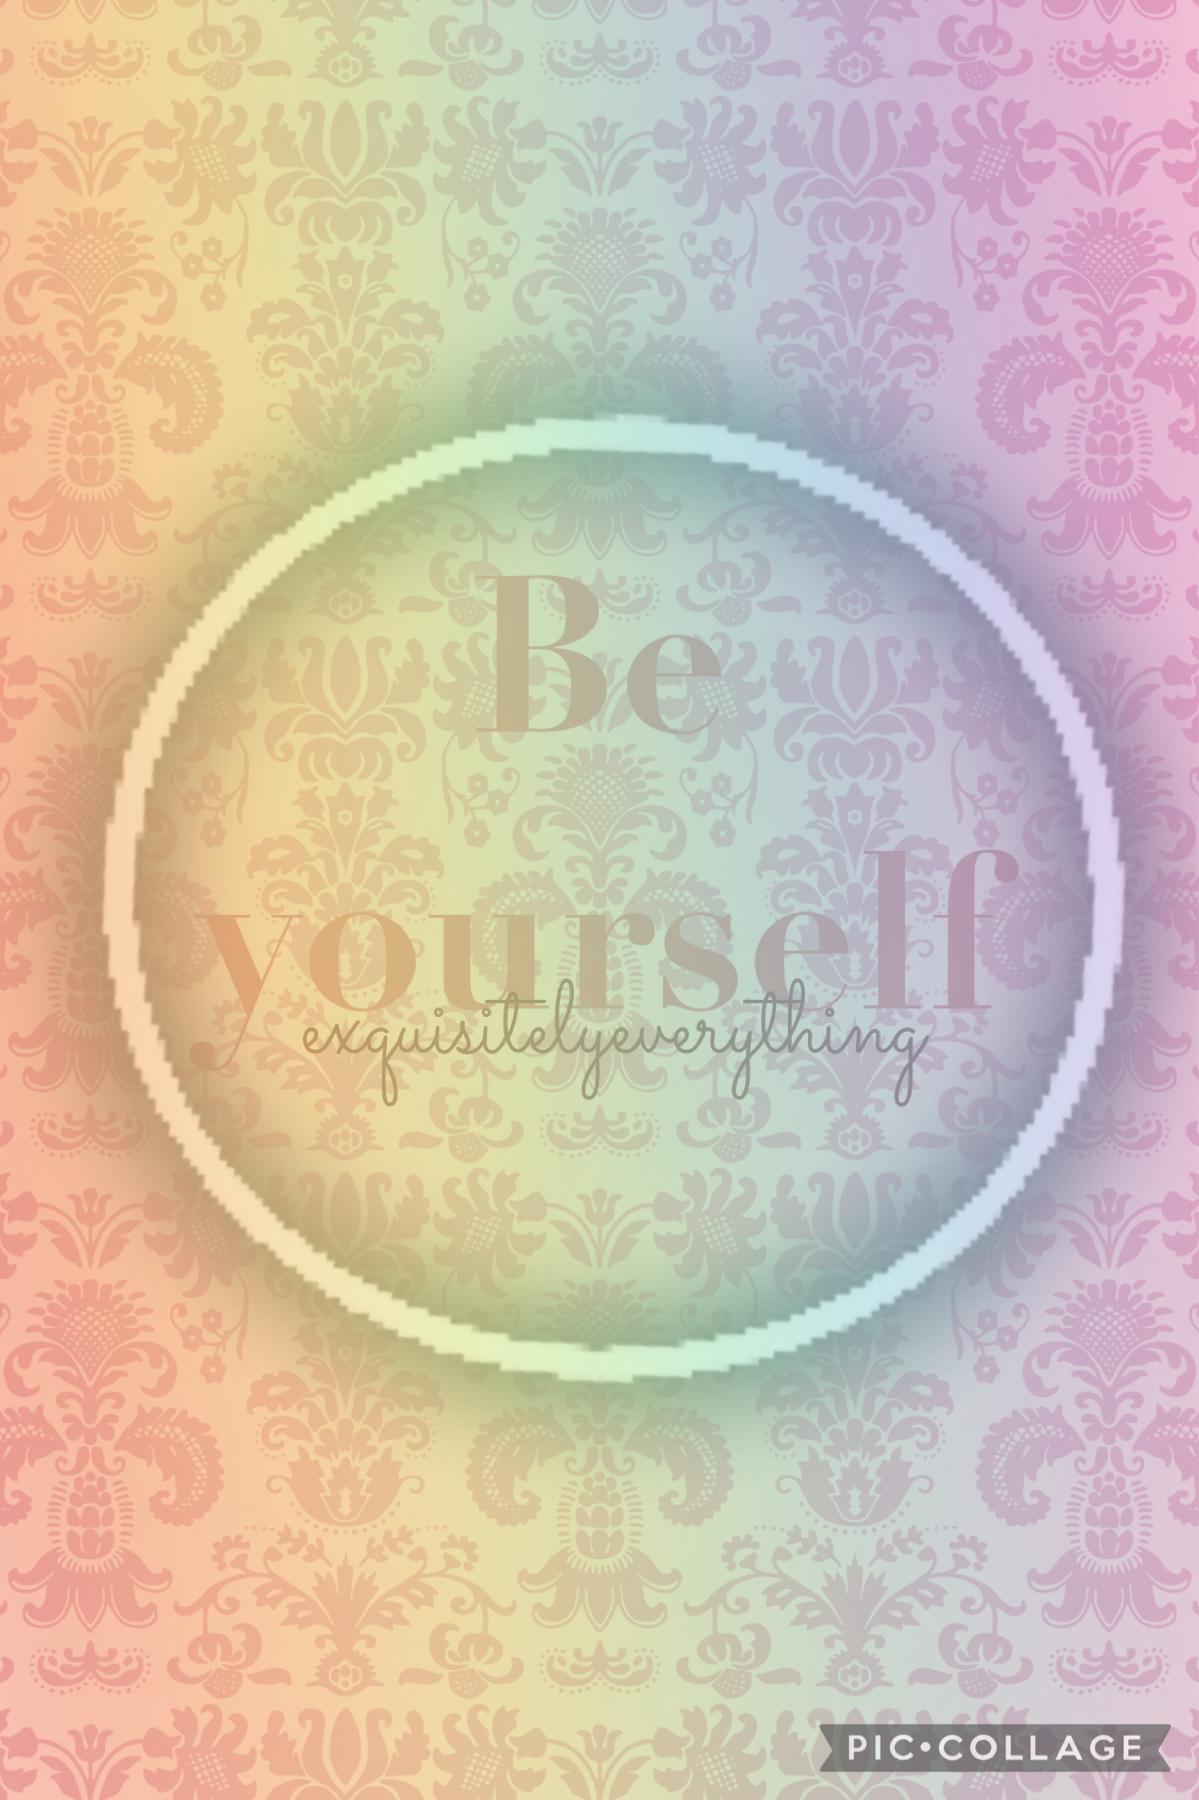 Be yourself 